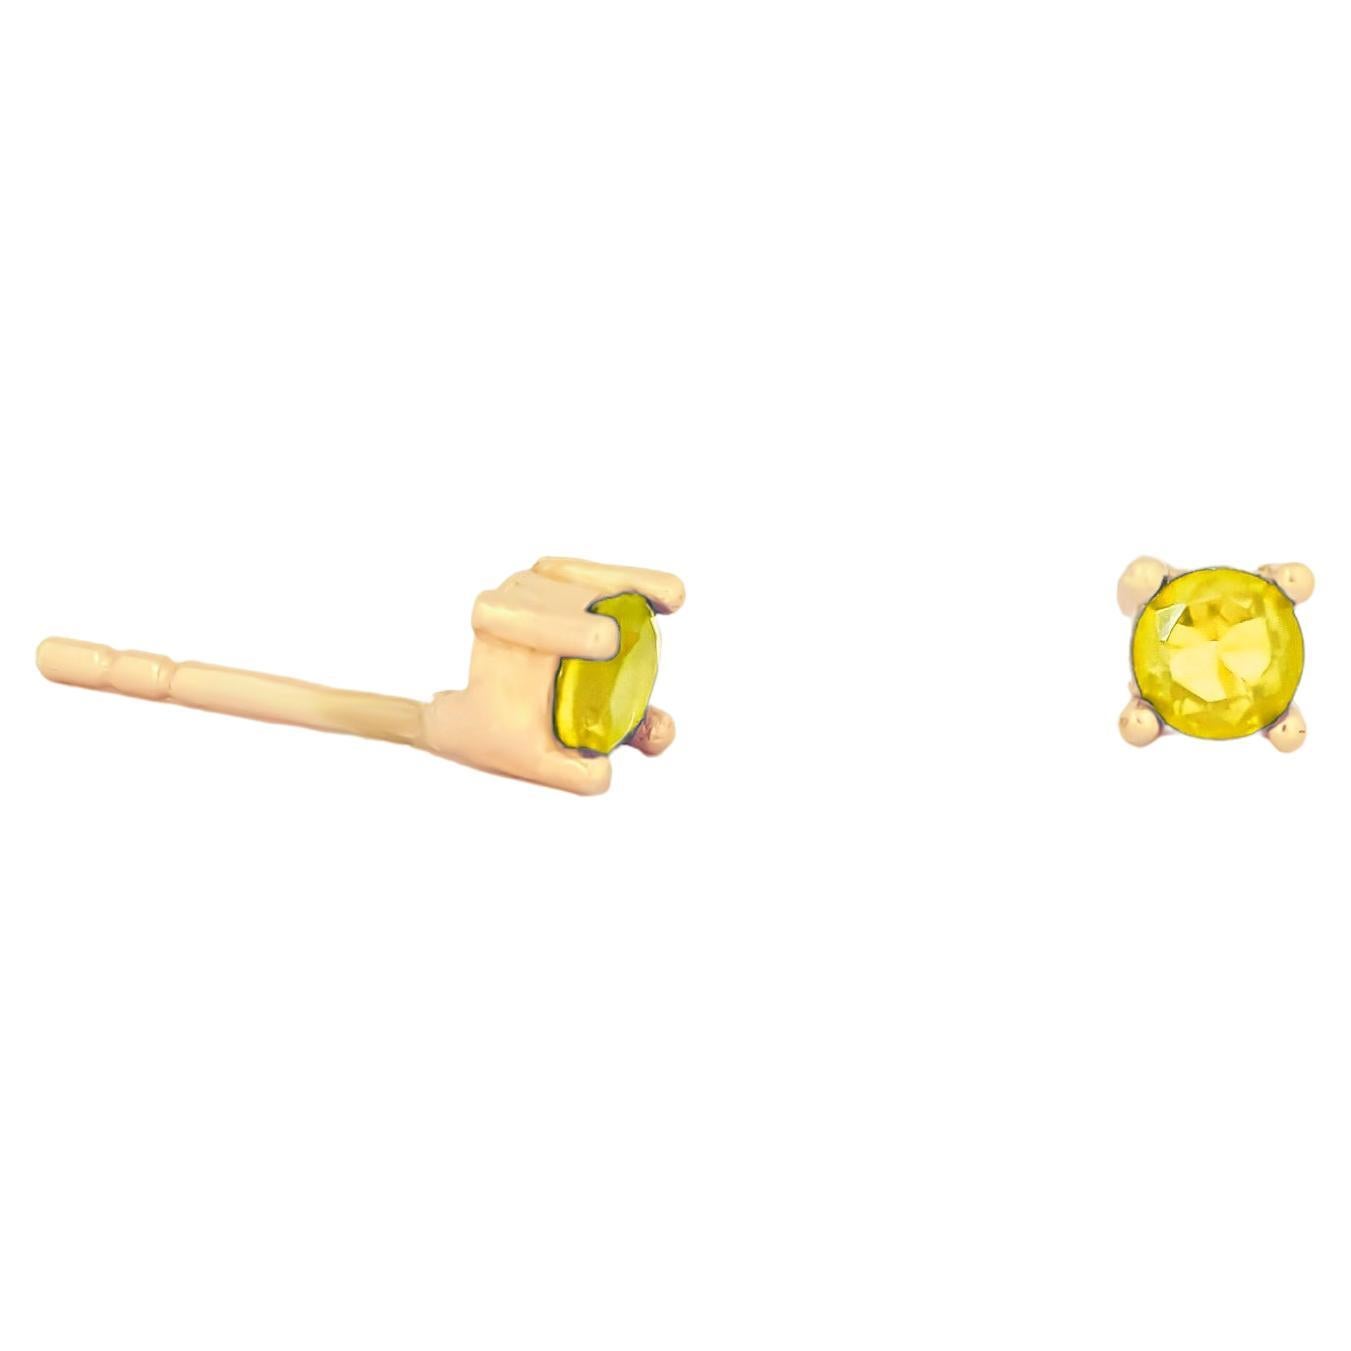 14 ct Gold Lab Sapphire Stud Earrings.  